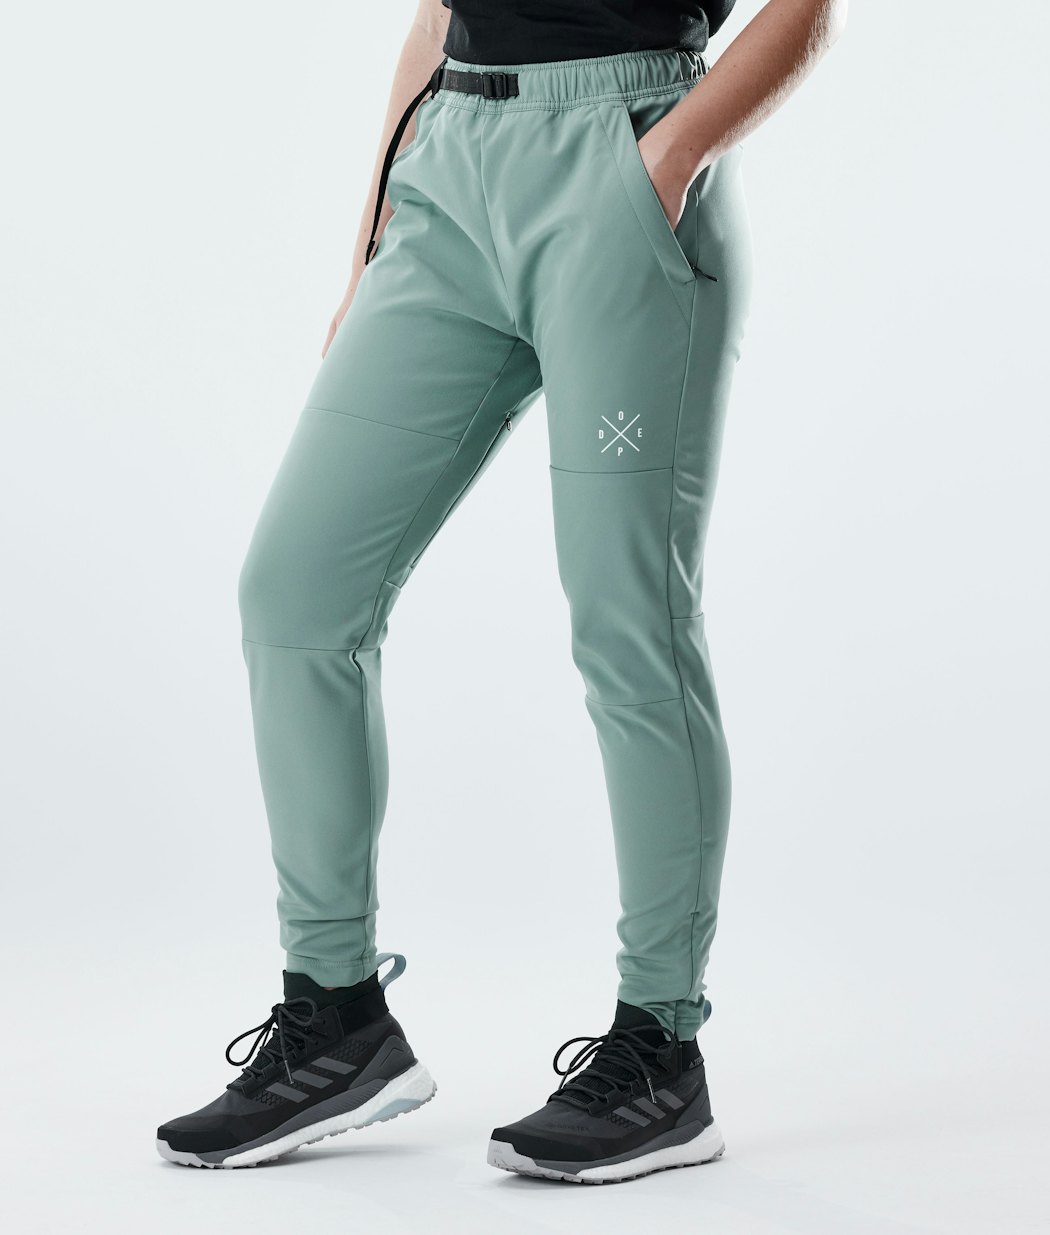 Nomad W Outdoor Pants Women Faded Green